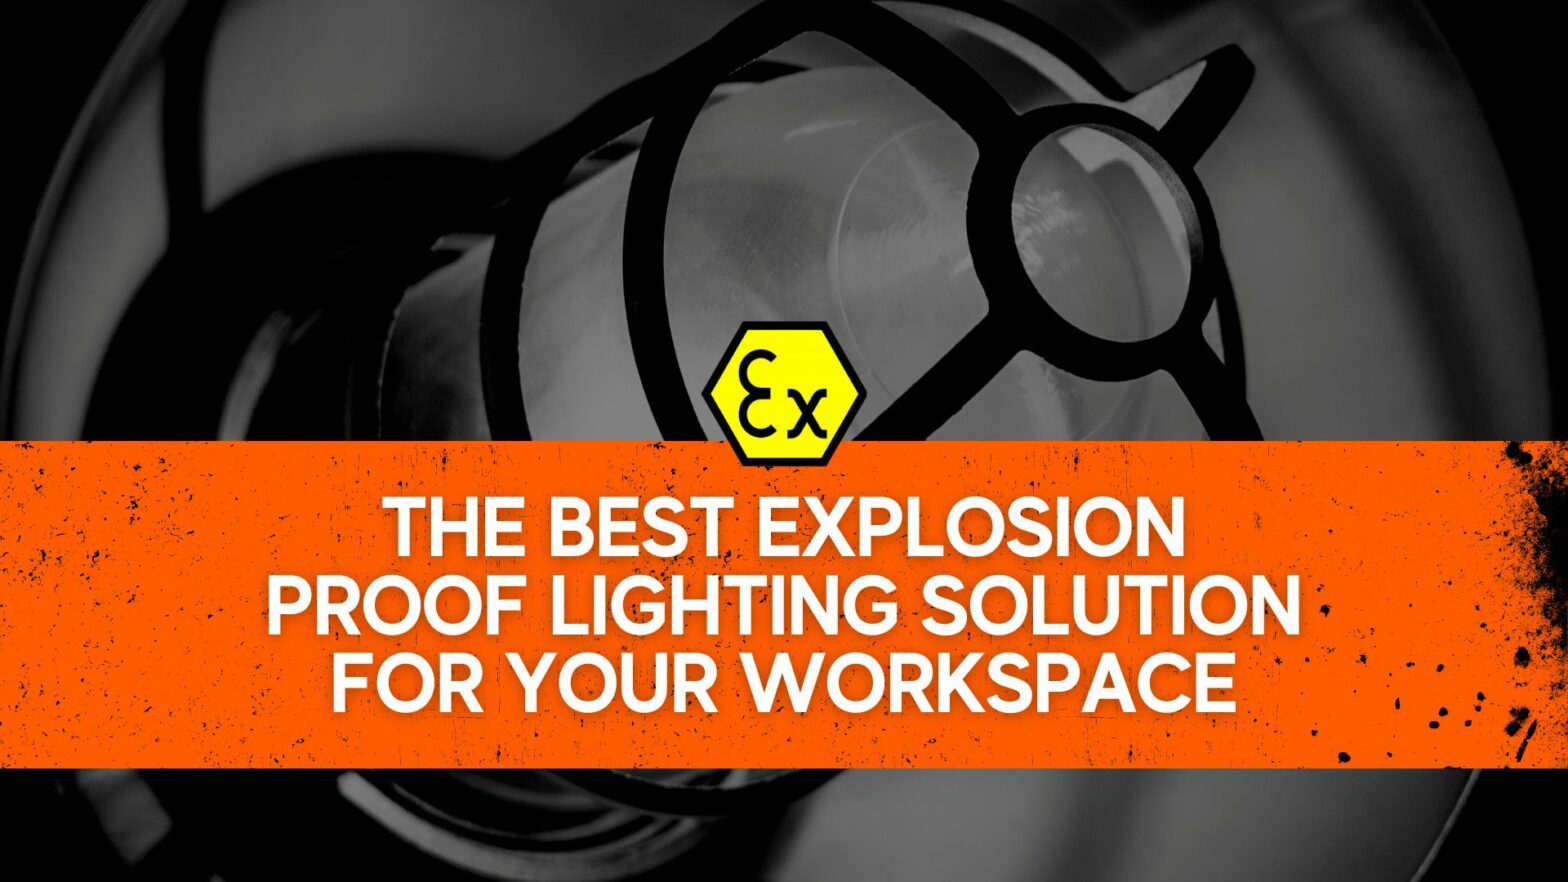 The best explosion proof lighting solution for your workspace